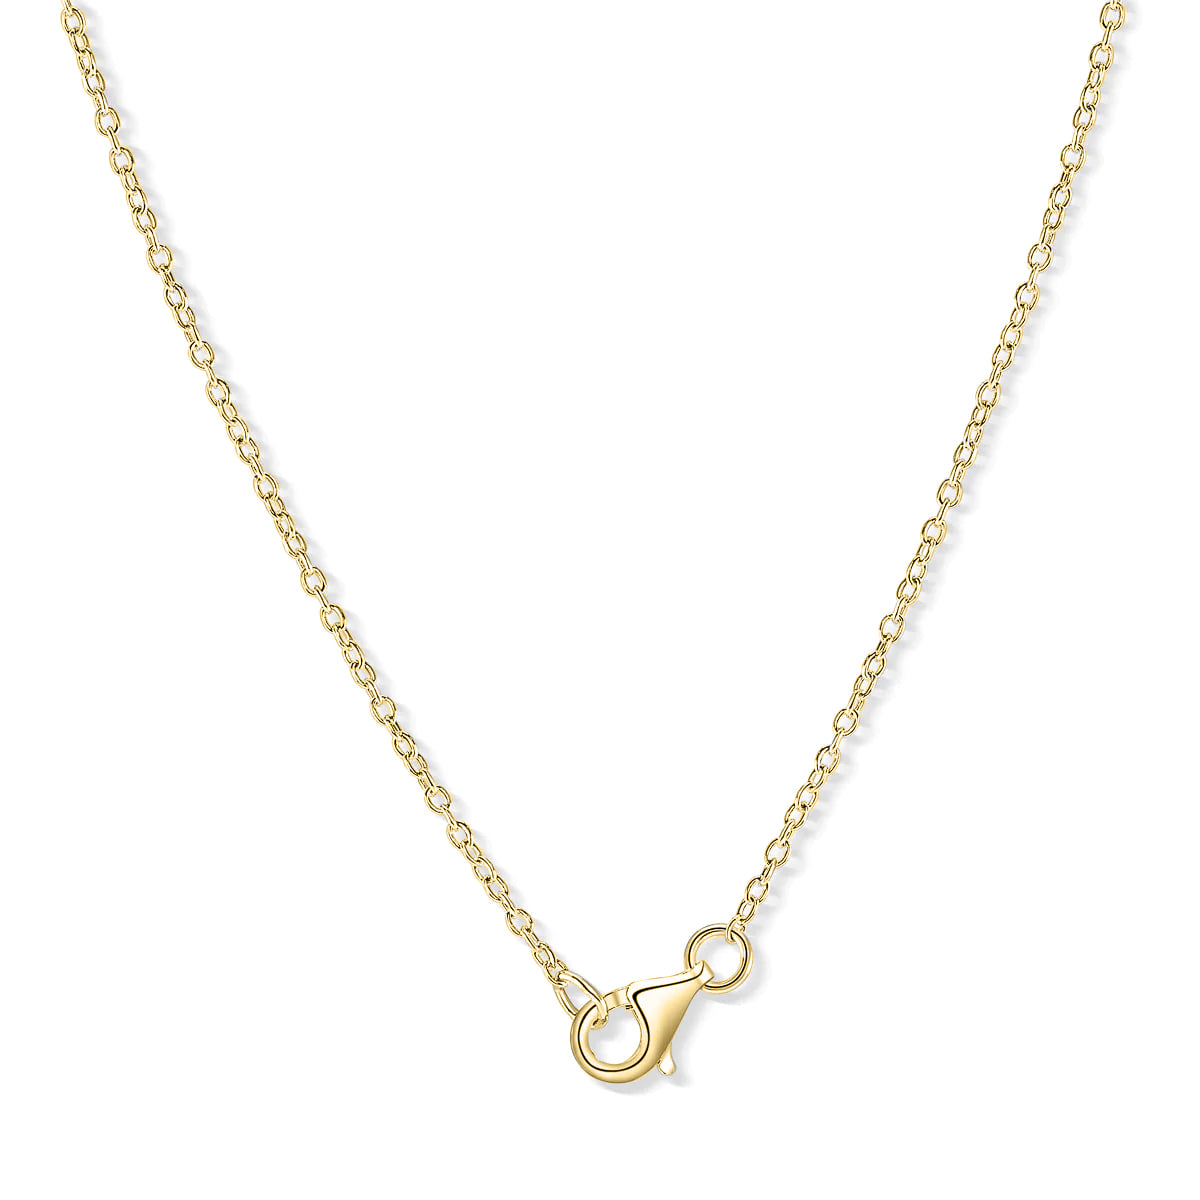 Lobster clasp gold chain